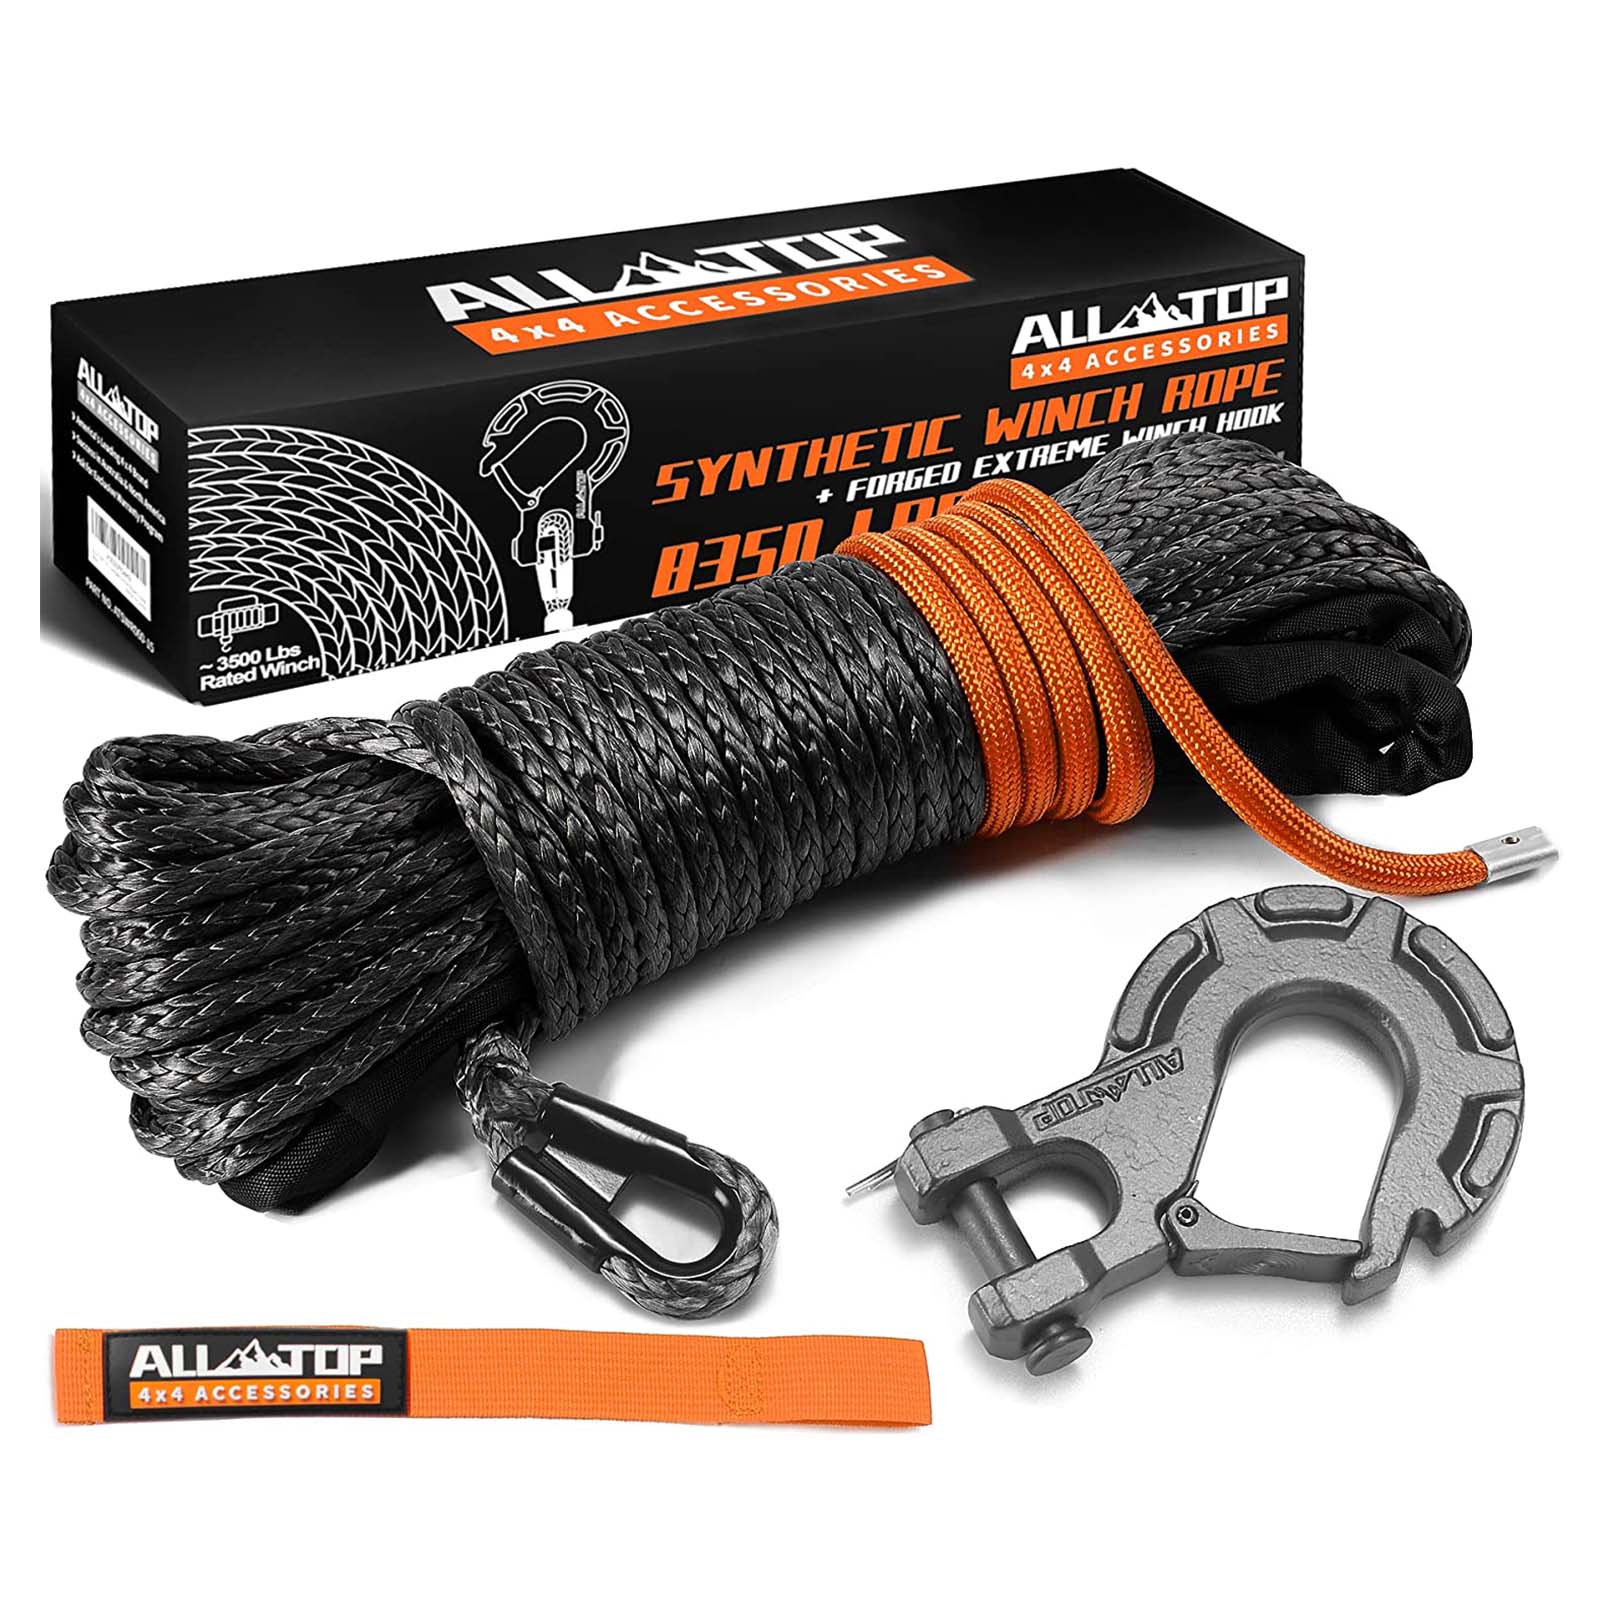 ALL-TOP Synthetic Winch Cable w/ Forged Winch Hook - 3/16in x 50ft - 8350LBS